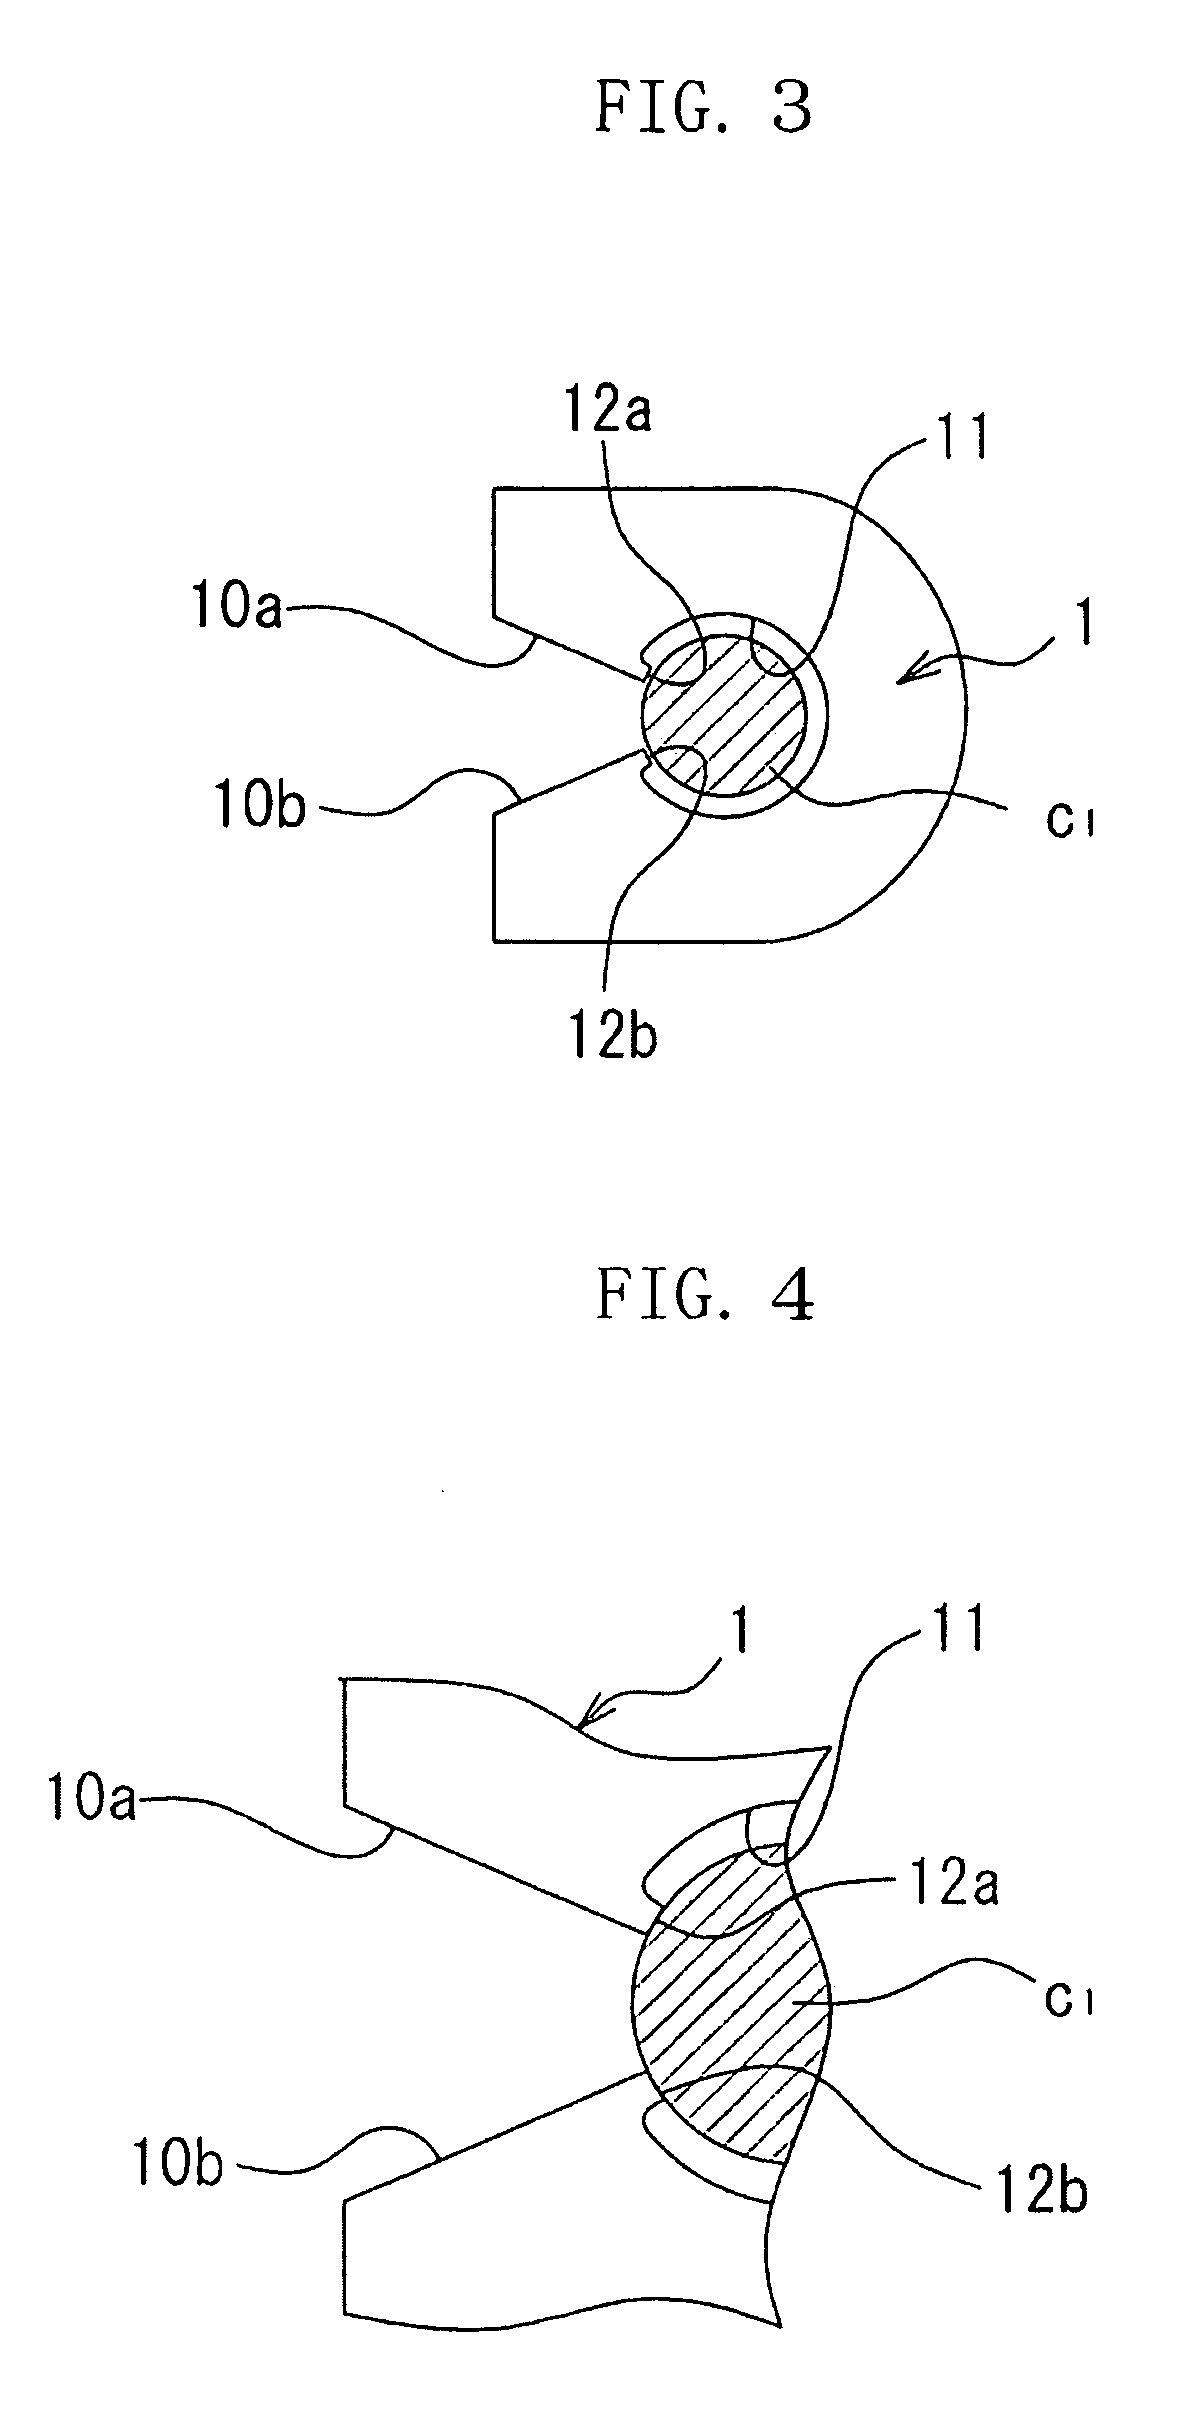 Clip-Mounting Seat and Vehicle Interior Component